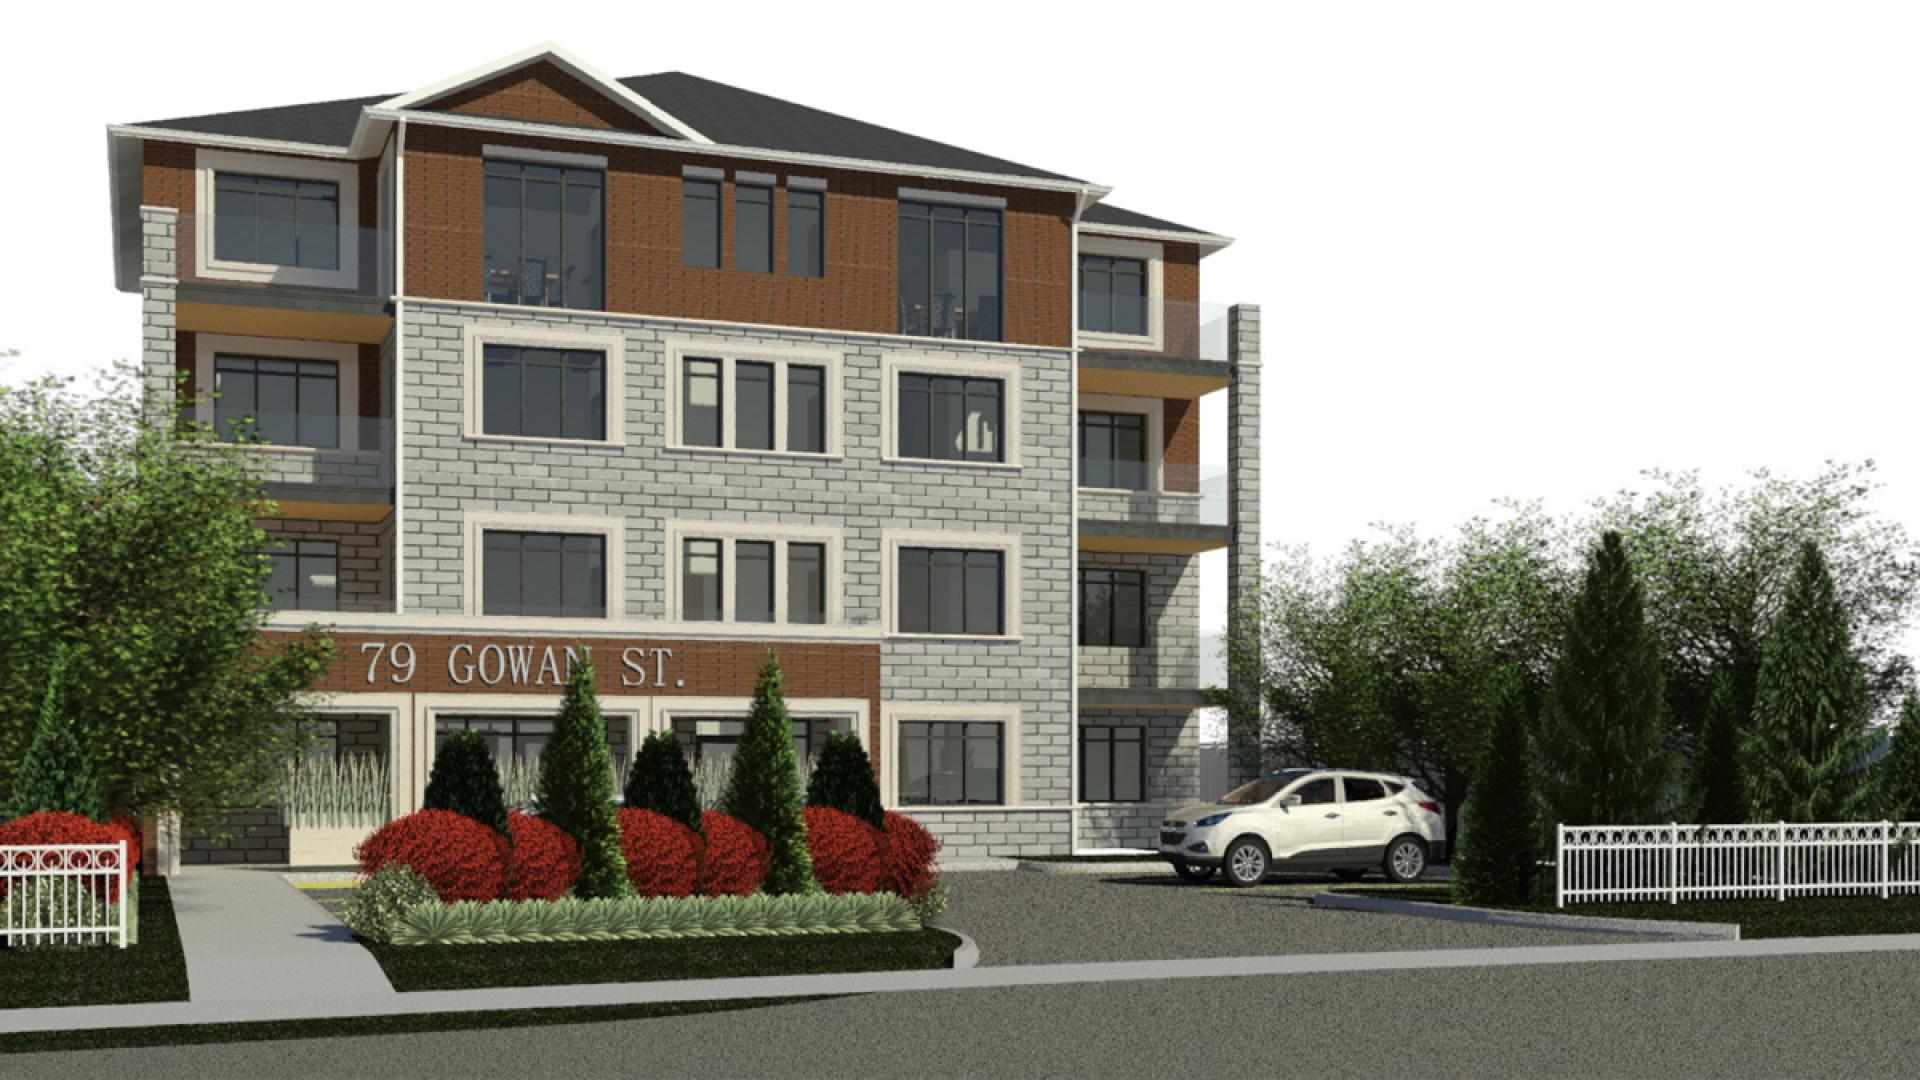 Rendering of the development project located at 79 Gowan Street